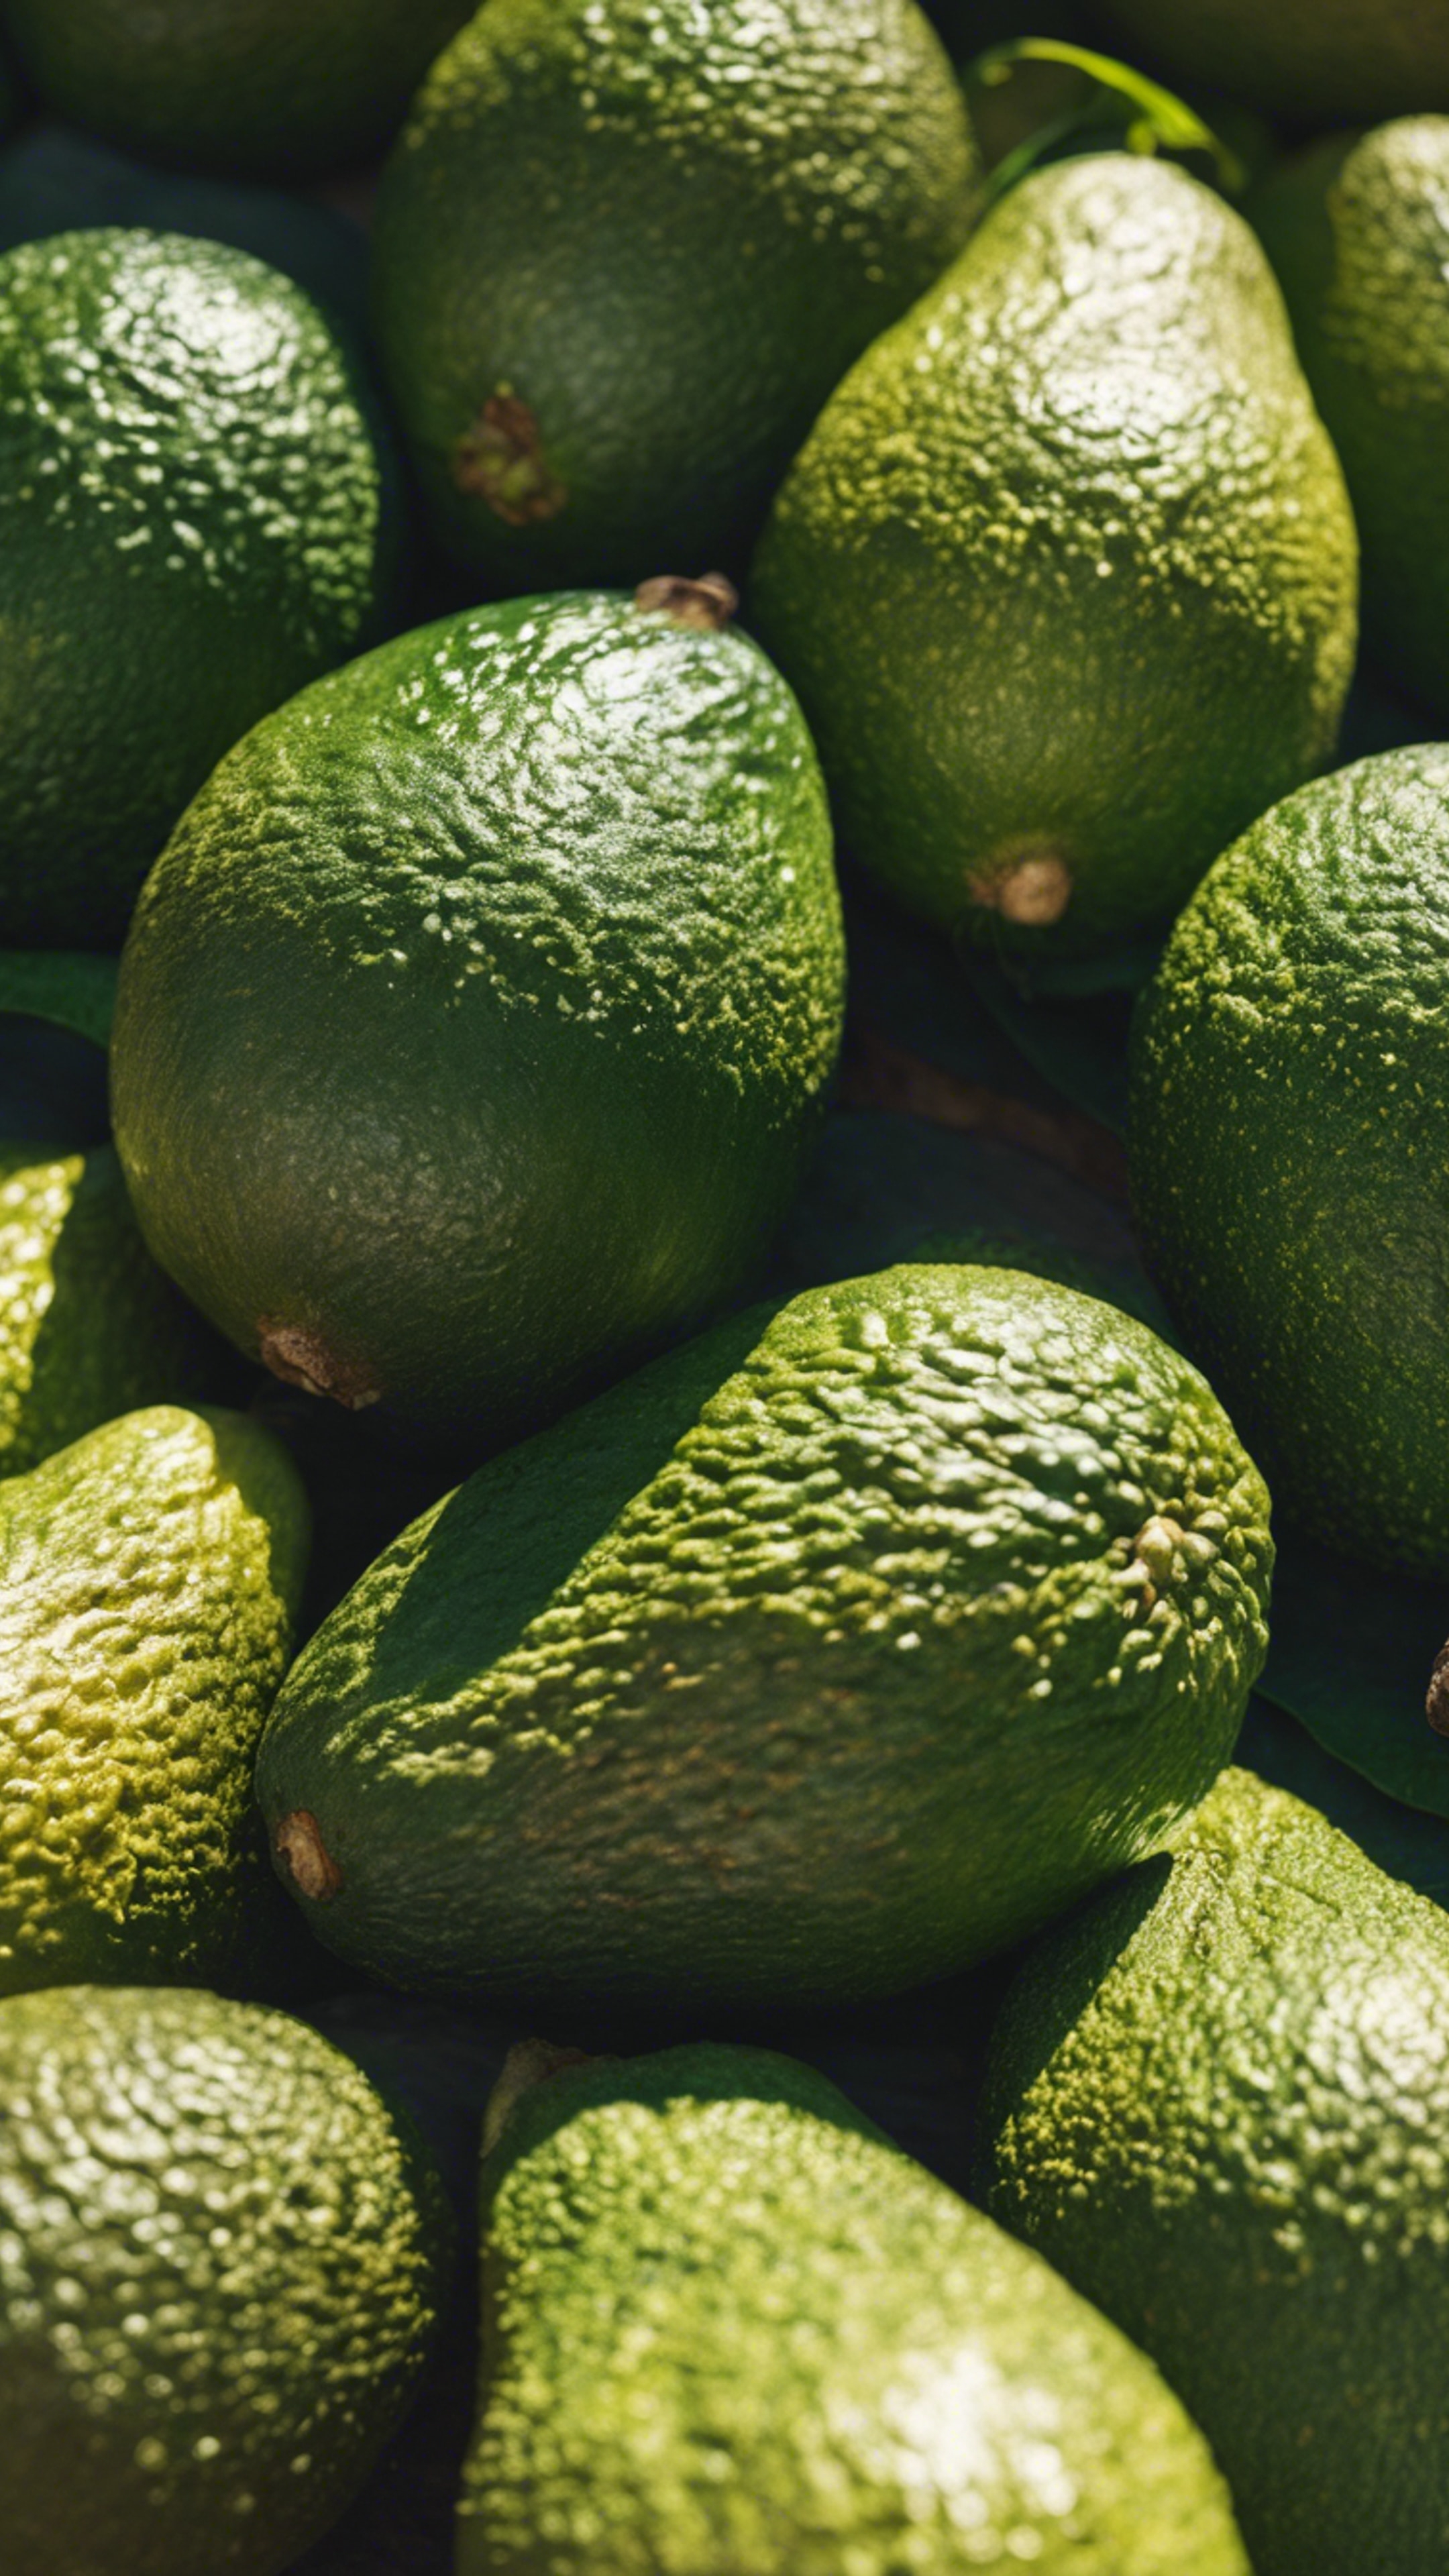 A group of cute avocados gathered under the sun of a bright midday Wallpaper[b59e09280317478e9ff0]